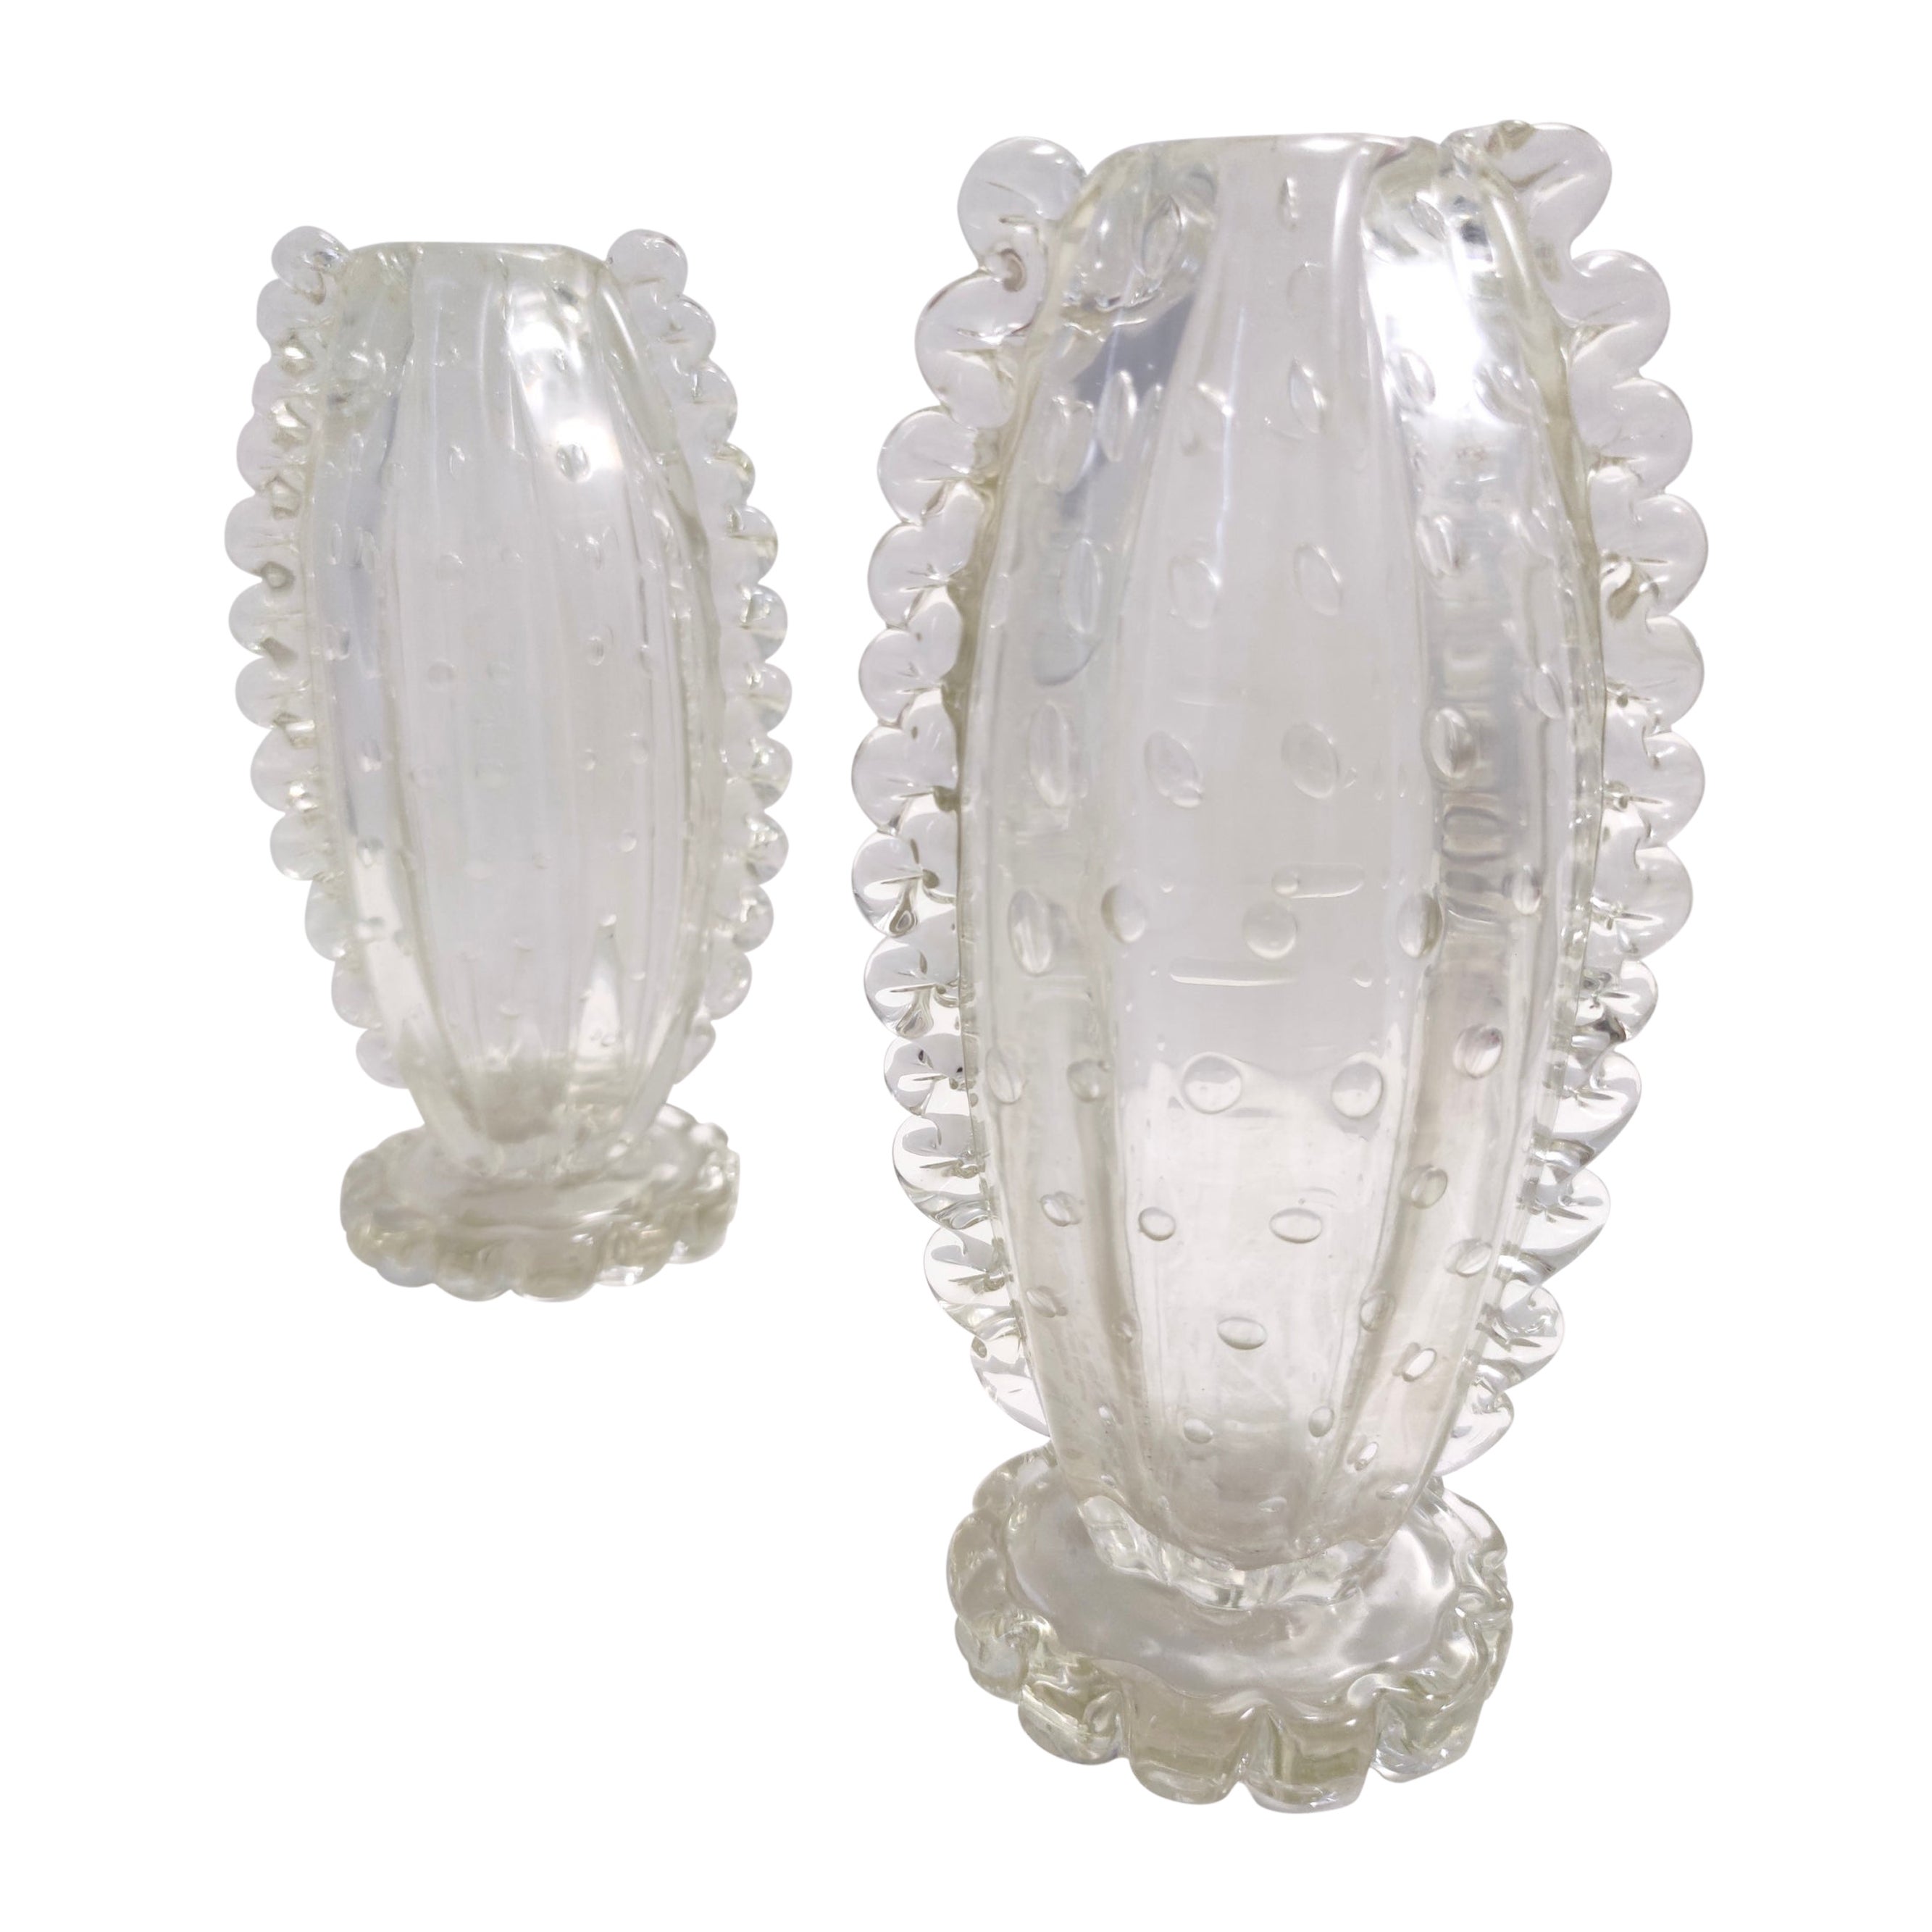 Vintage Pair of Transparent Bullicante Murano Glass Vases by Ercole Barovier For Sale